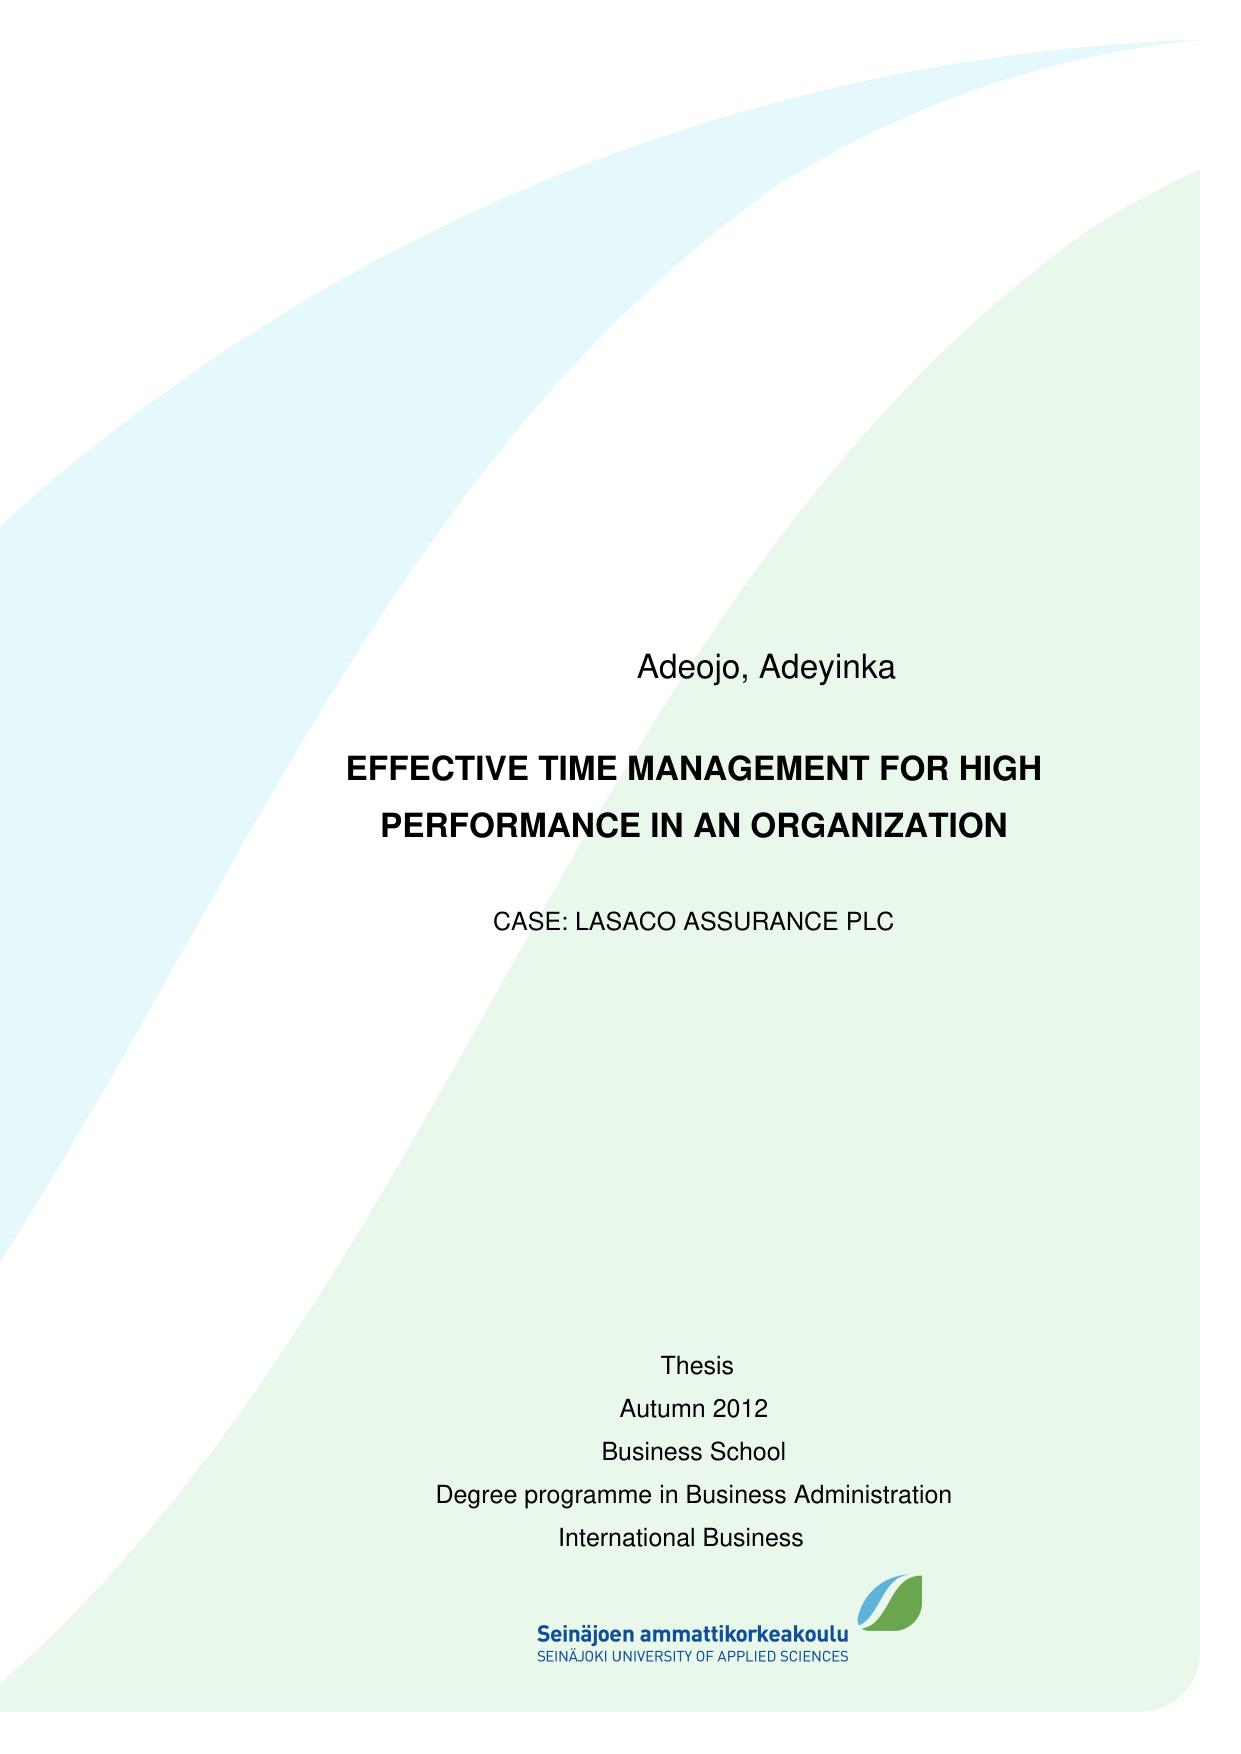 EFFECTIVE TIME MANAGEMENT FOR HIGH PEFORMANCE IN AN ORGANIZATION 2012